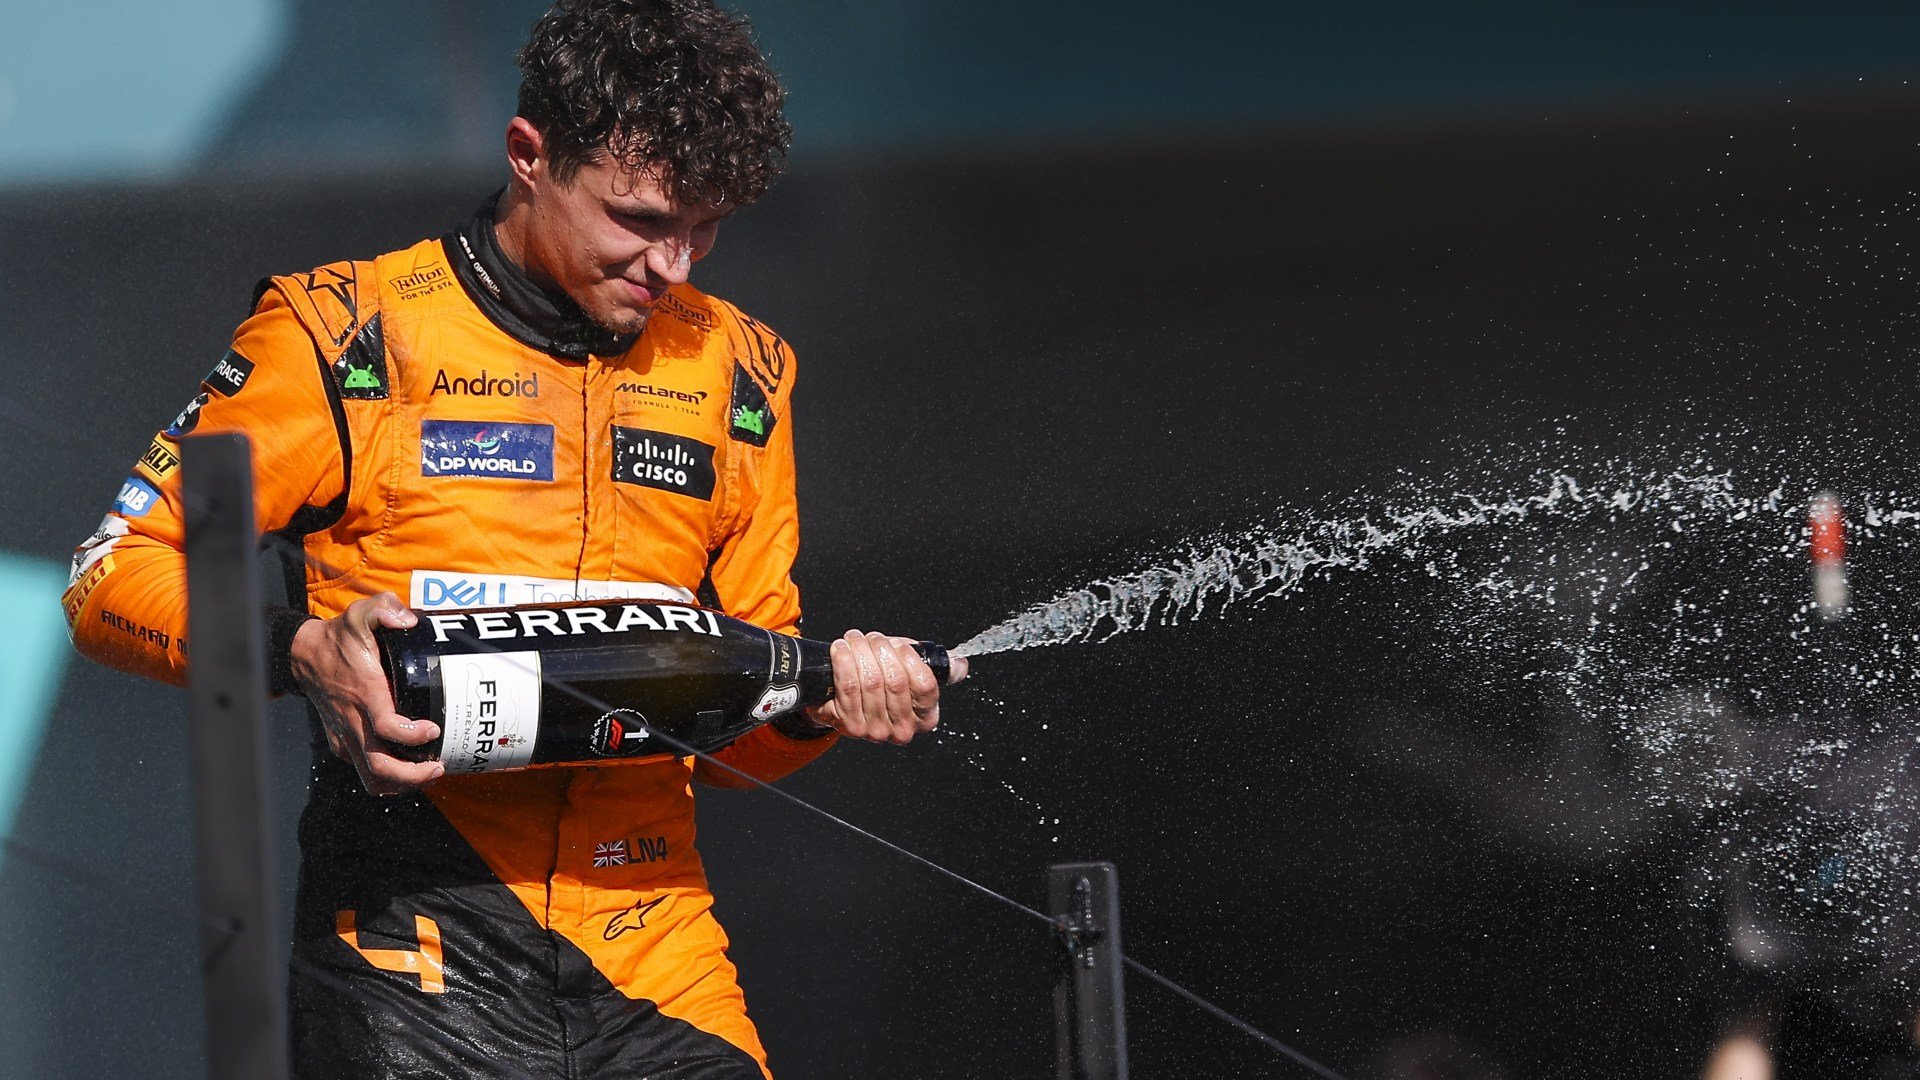 Lando Norris celebrated first F1 win with 24-hour bender partying with Verstappen before playing at iconic golf course